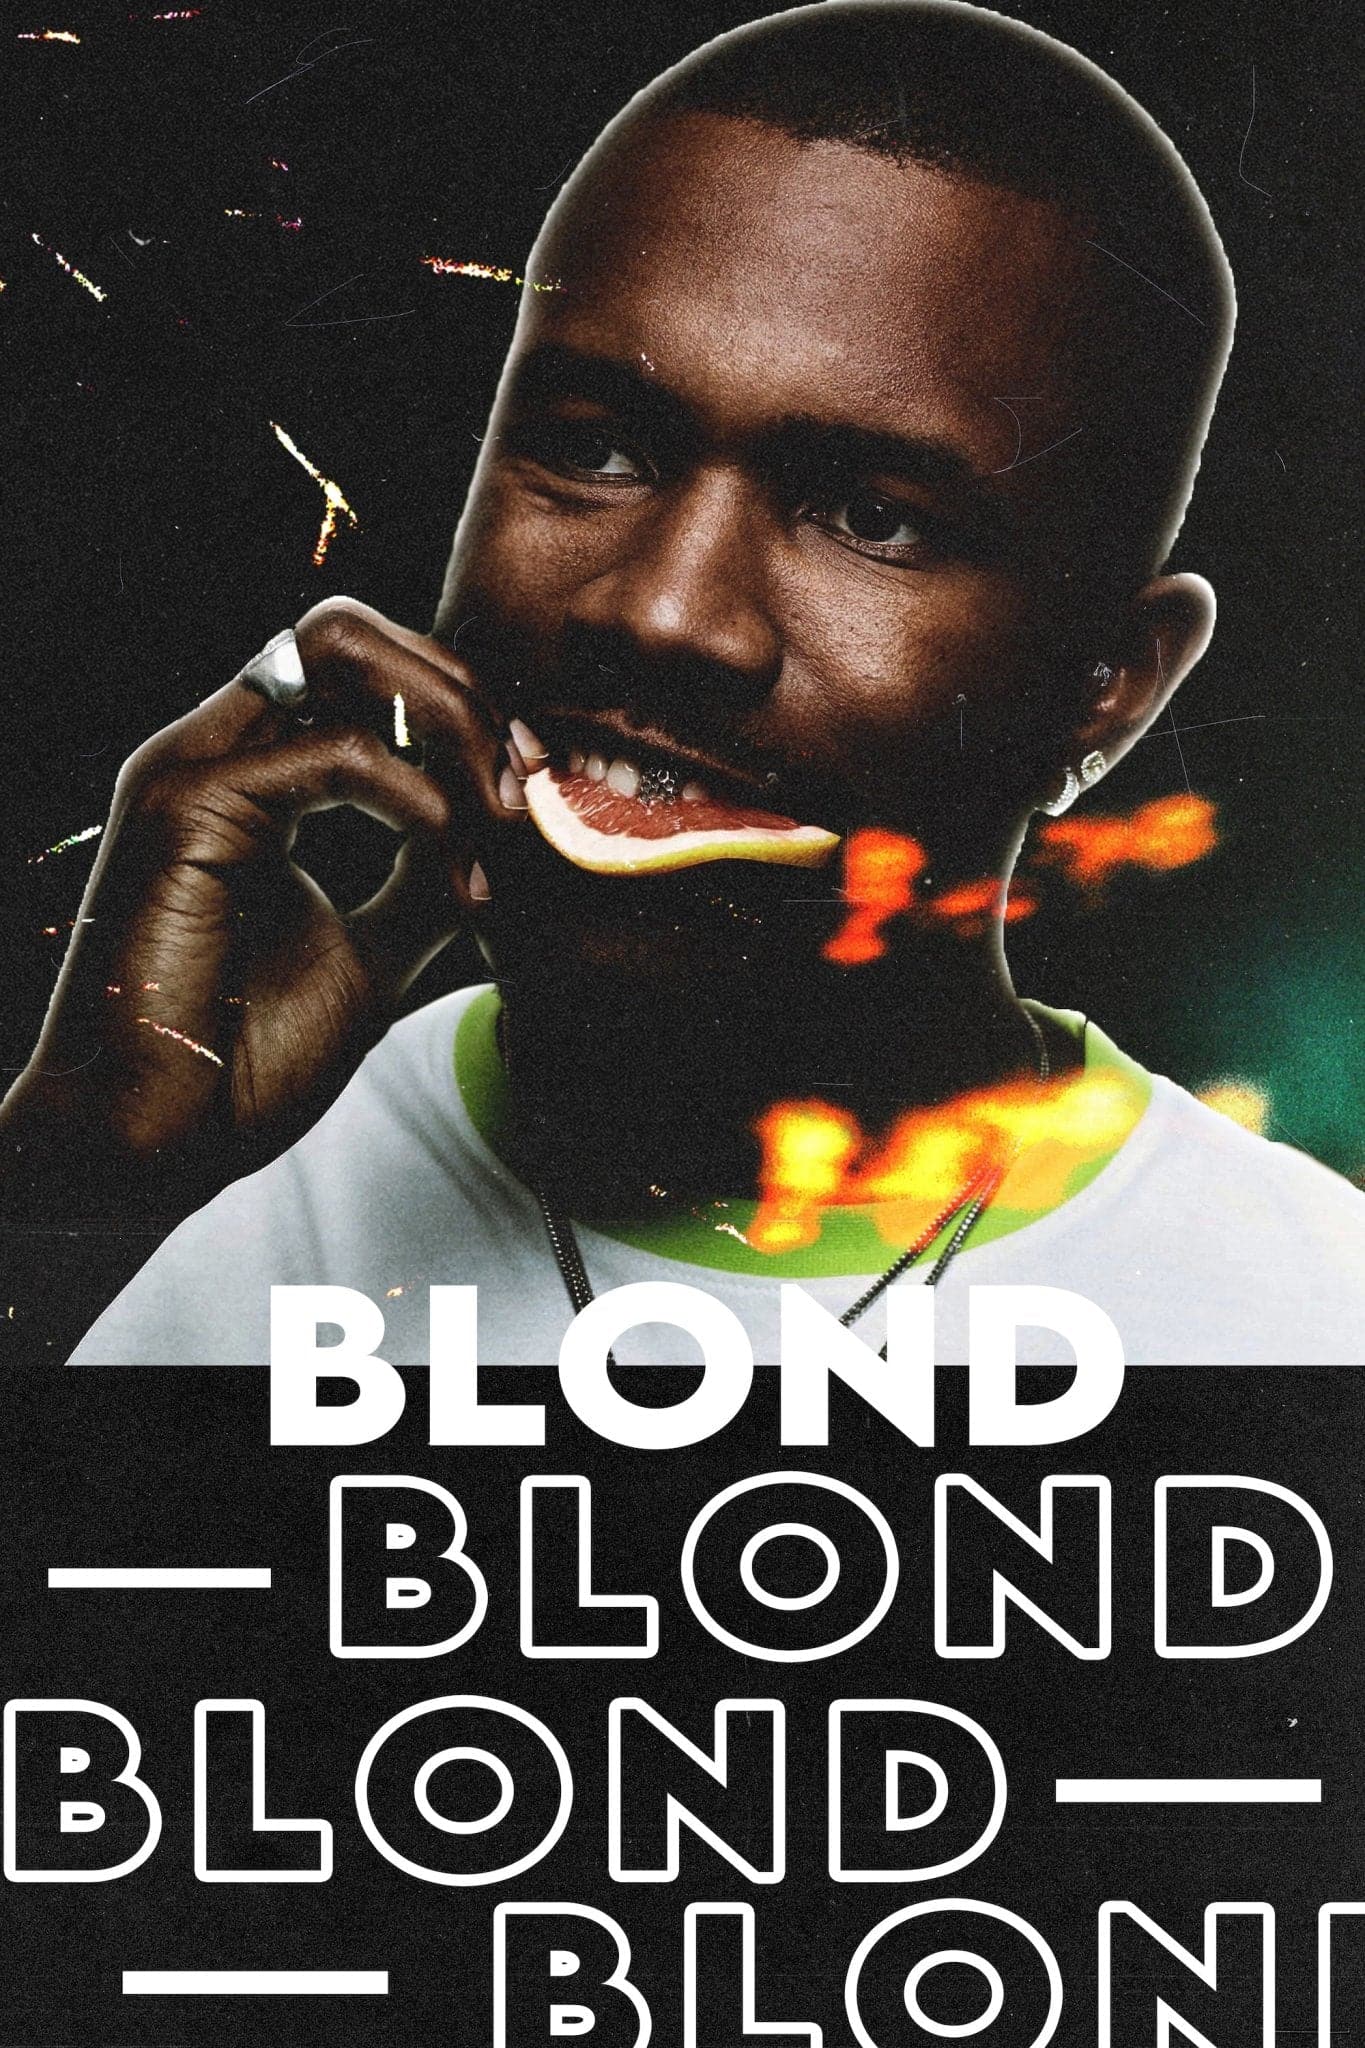 BLONDED